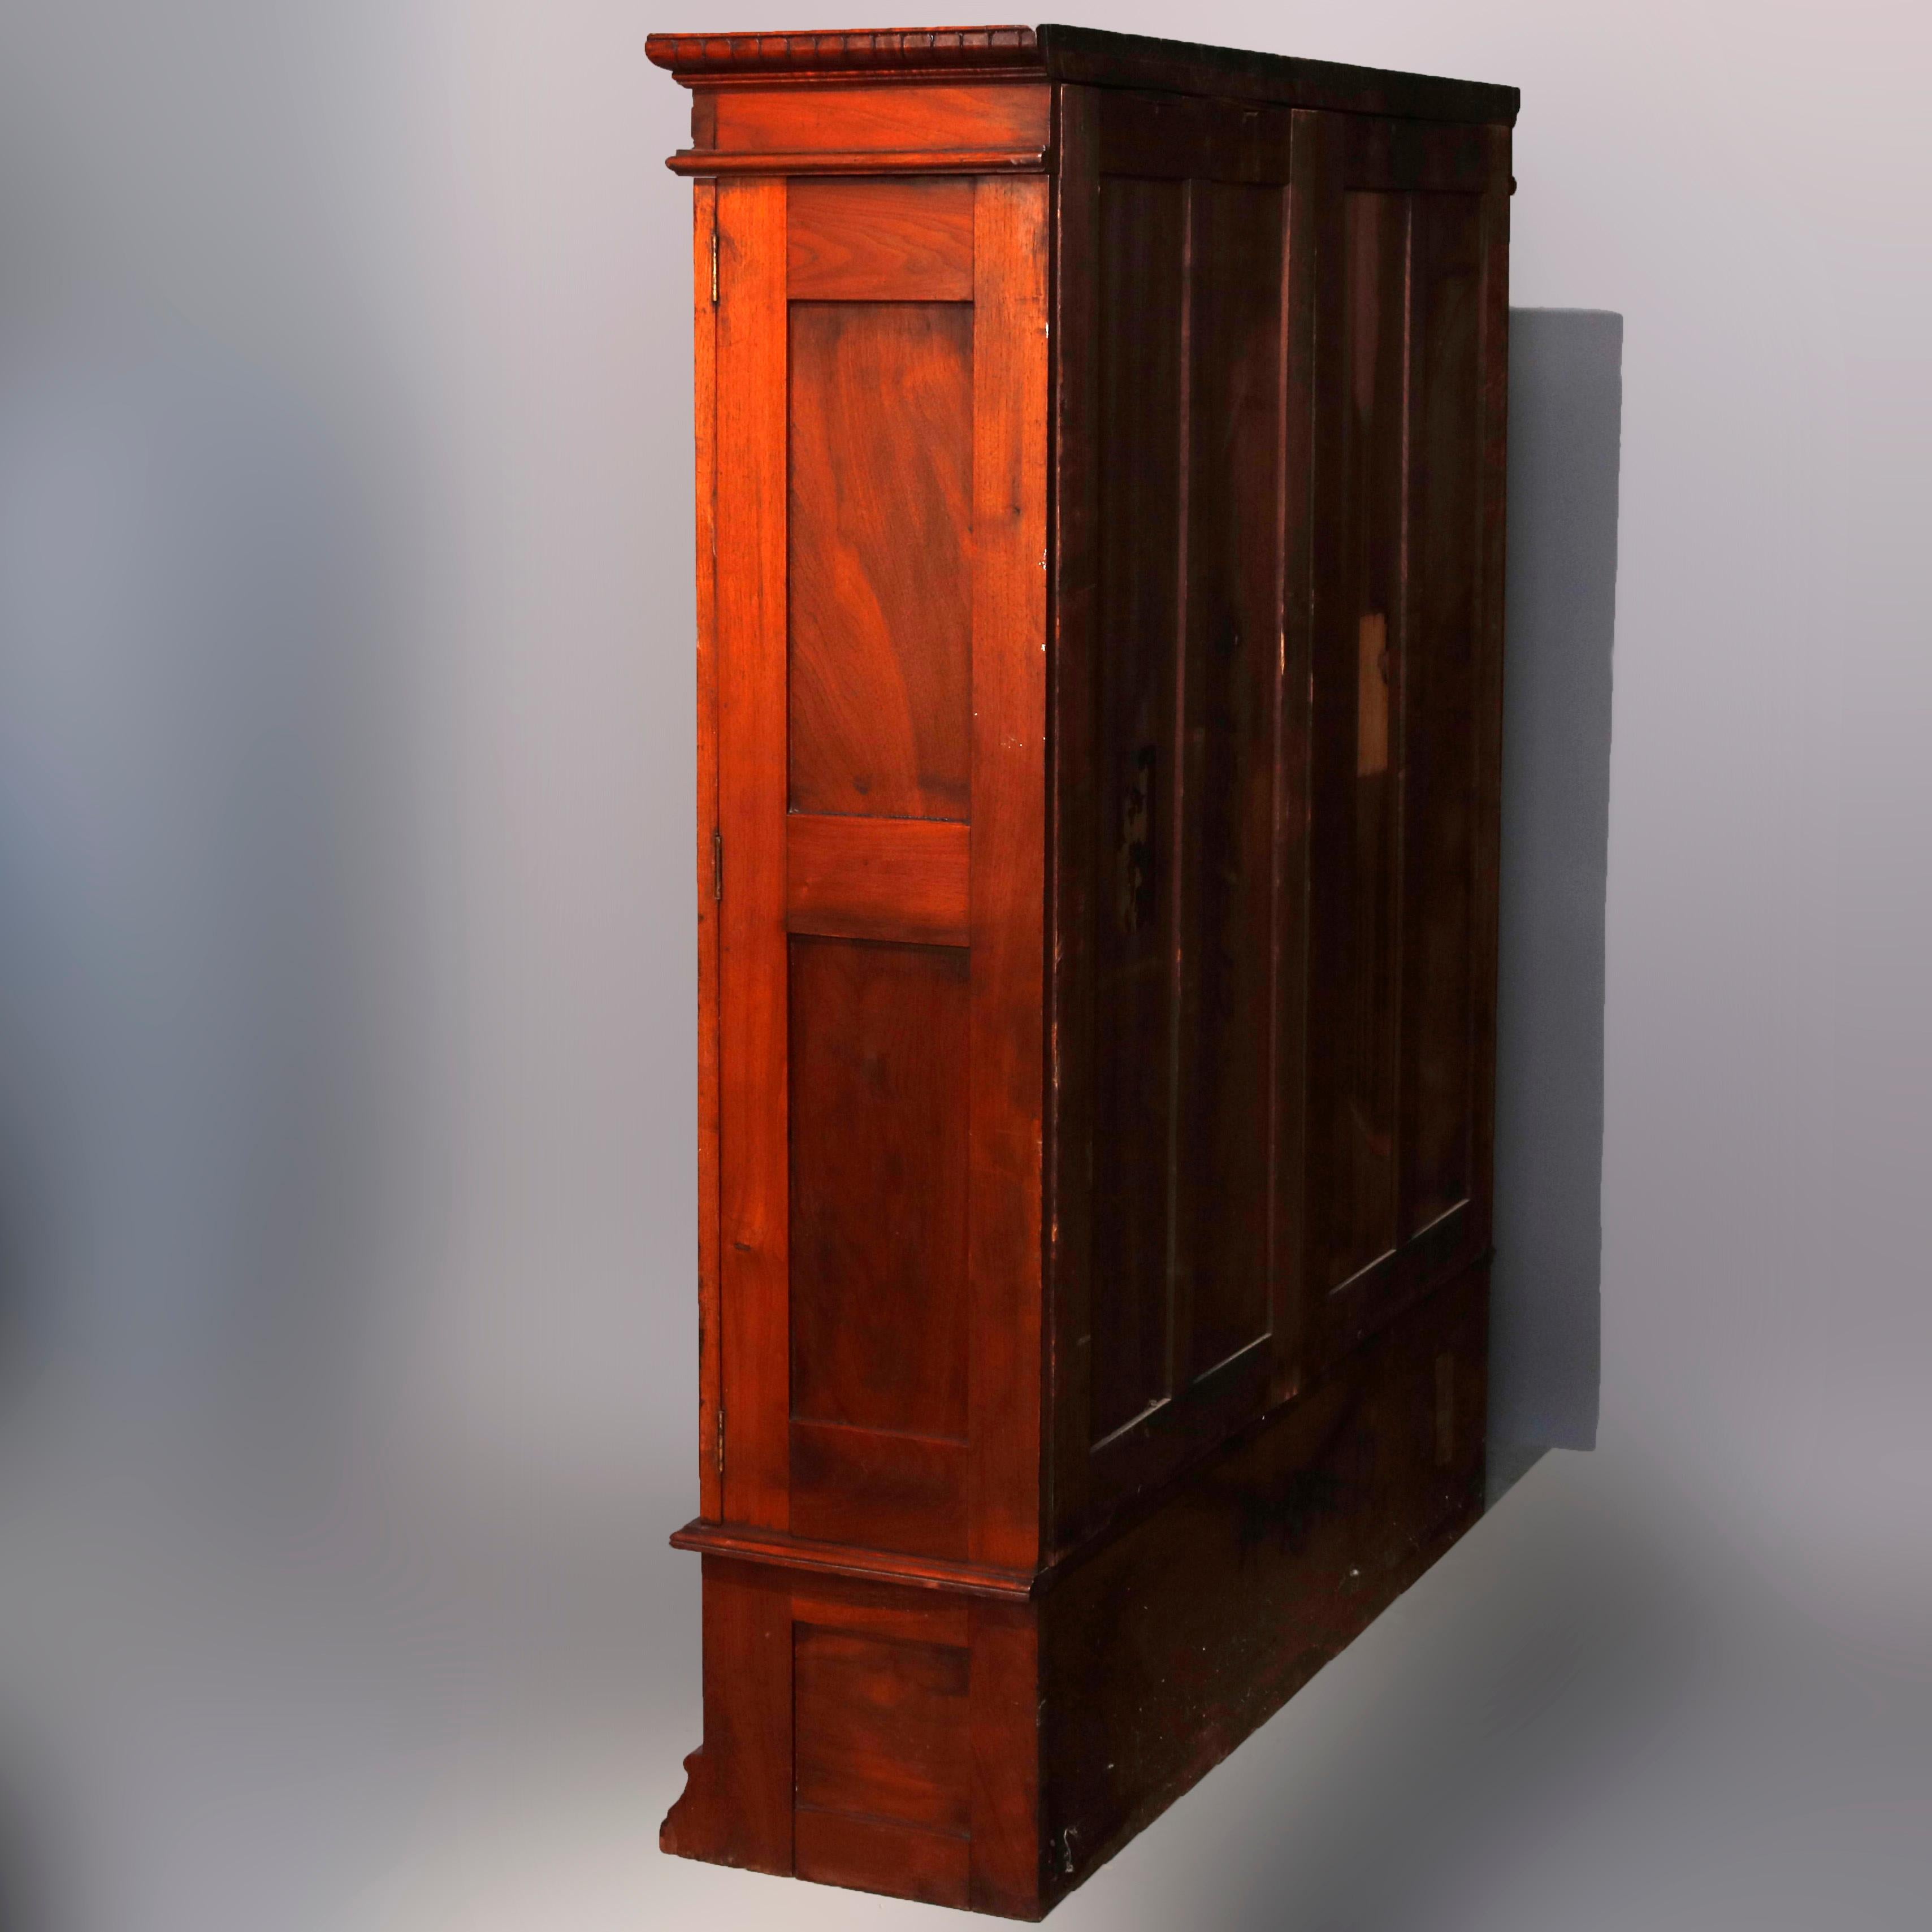 American Victorian Burl Walnut Enclosed Double Door Bookcase with Drawers, circa 1890